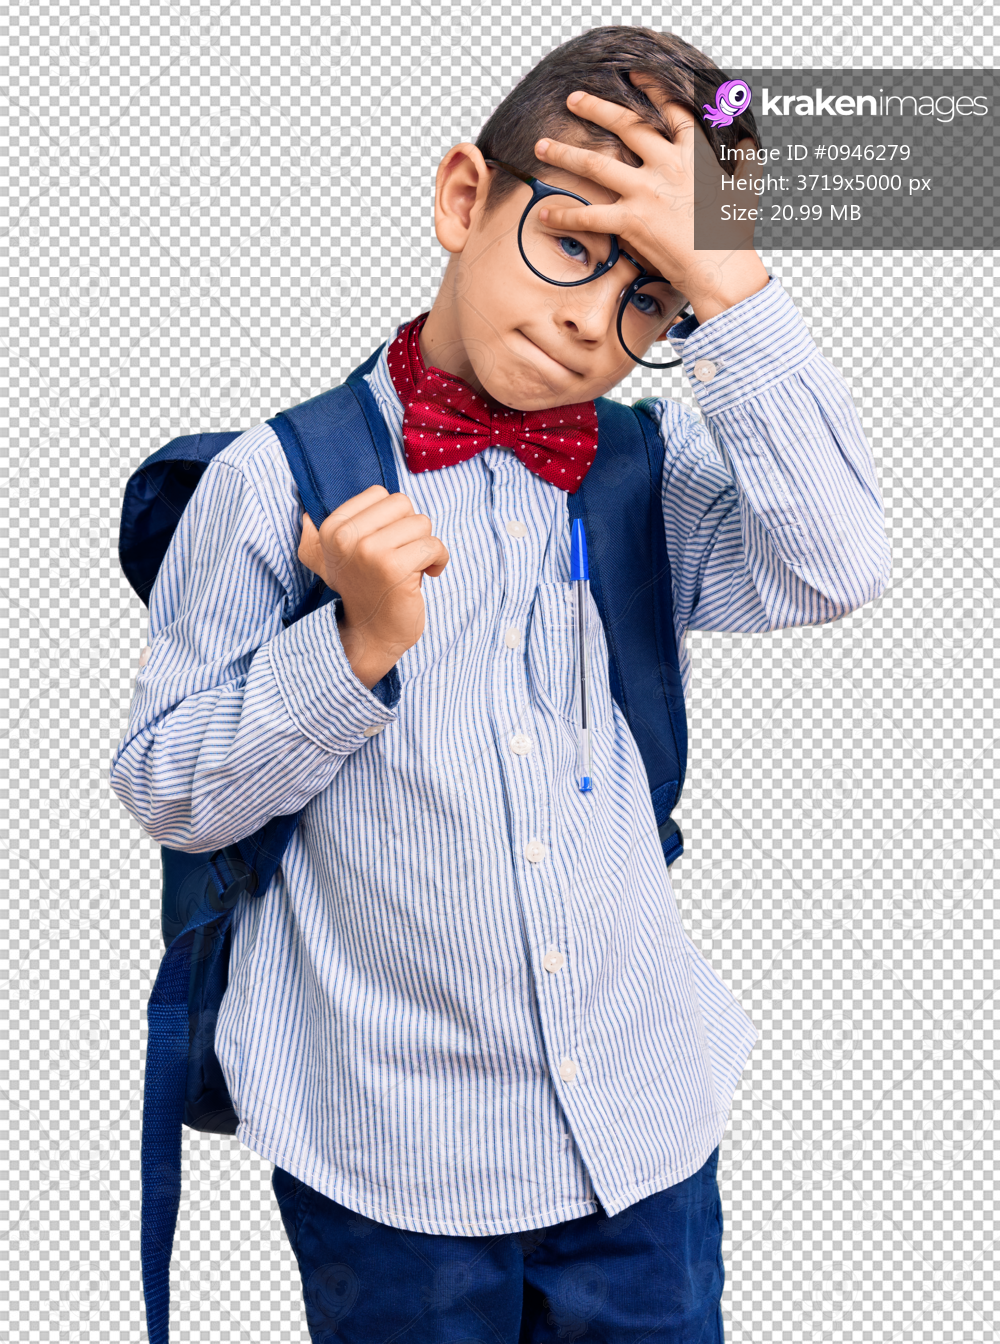 Cute blond kid wearing nerd bow tie and backpack stressed and frustrated with hand on head, surprised and angry face